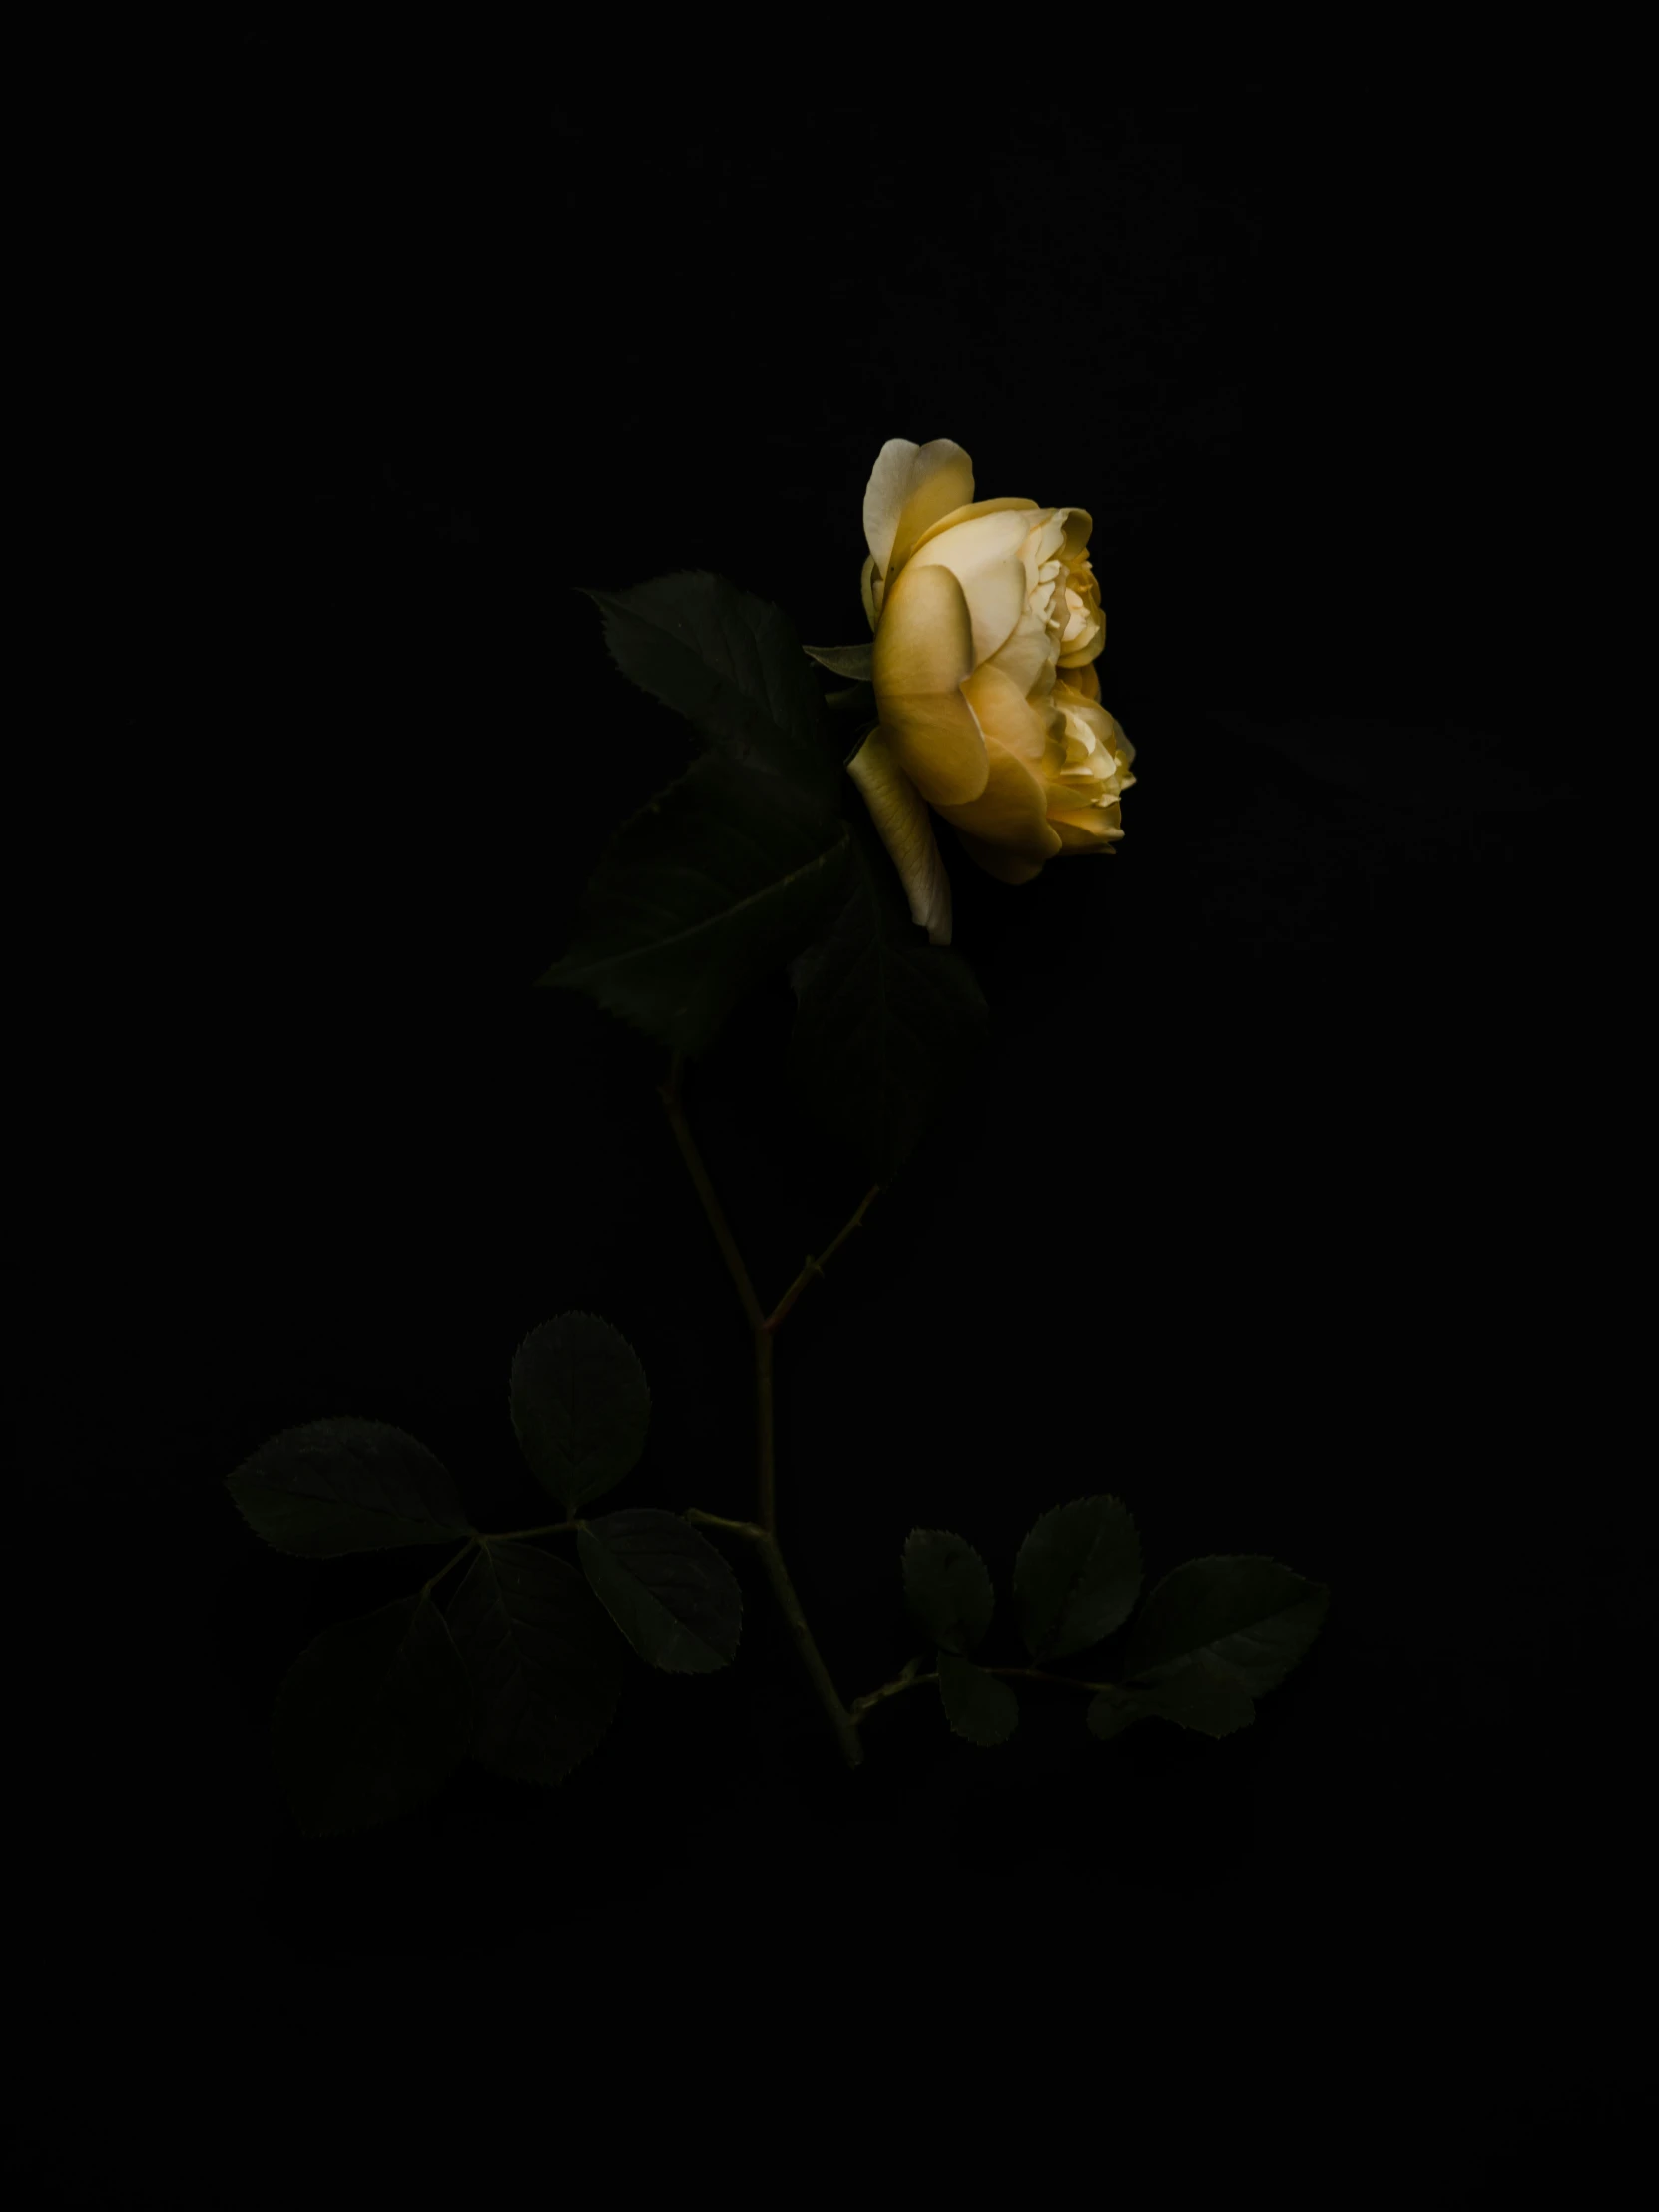 a single yellow rose is pographed in this pograph